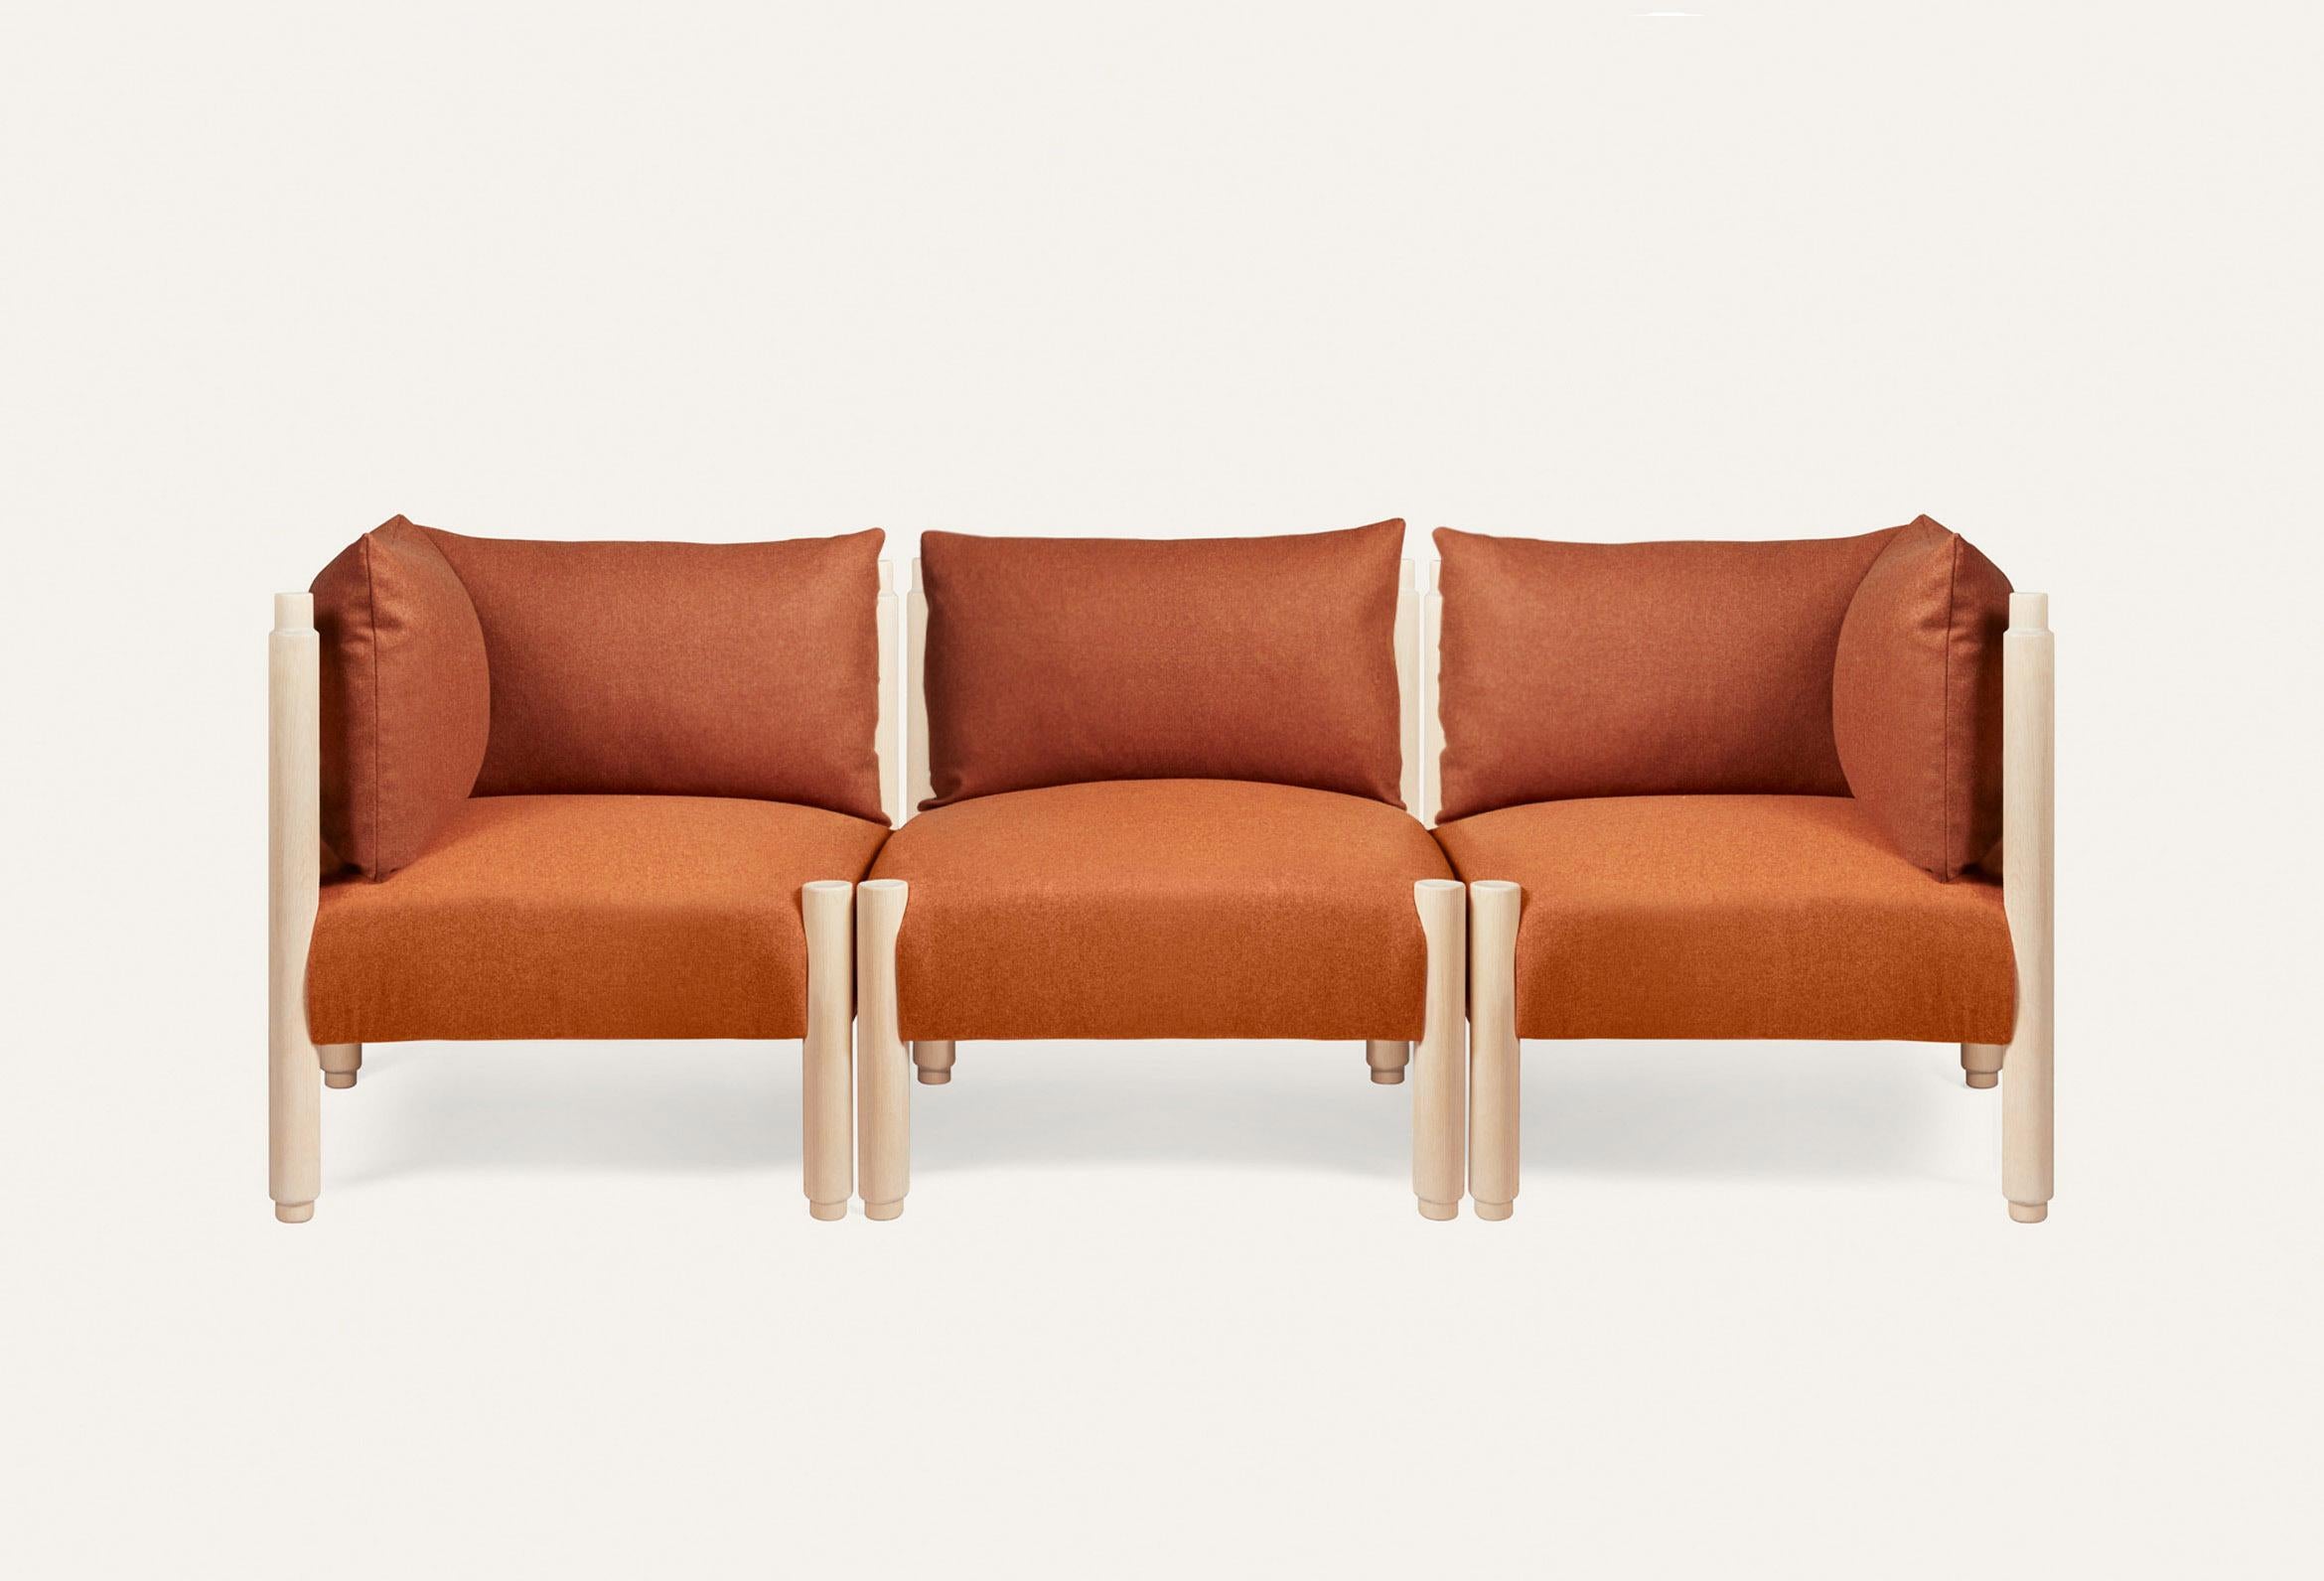 Natural and orange stand by Me sofa with pillows by Storängen Design
Dimensions: D 222 x W 74 x H 73 x SH 42 cm.
Materials: birch wood, fabric.
Available in other colors and fabrics. With fixed back or pillows.
Available in different module